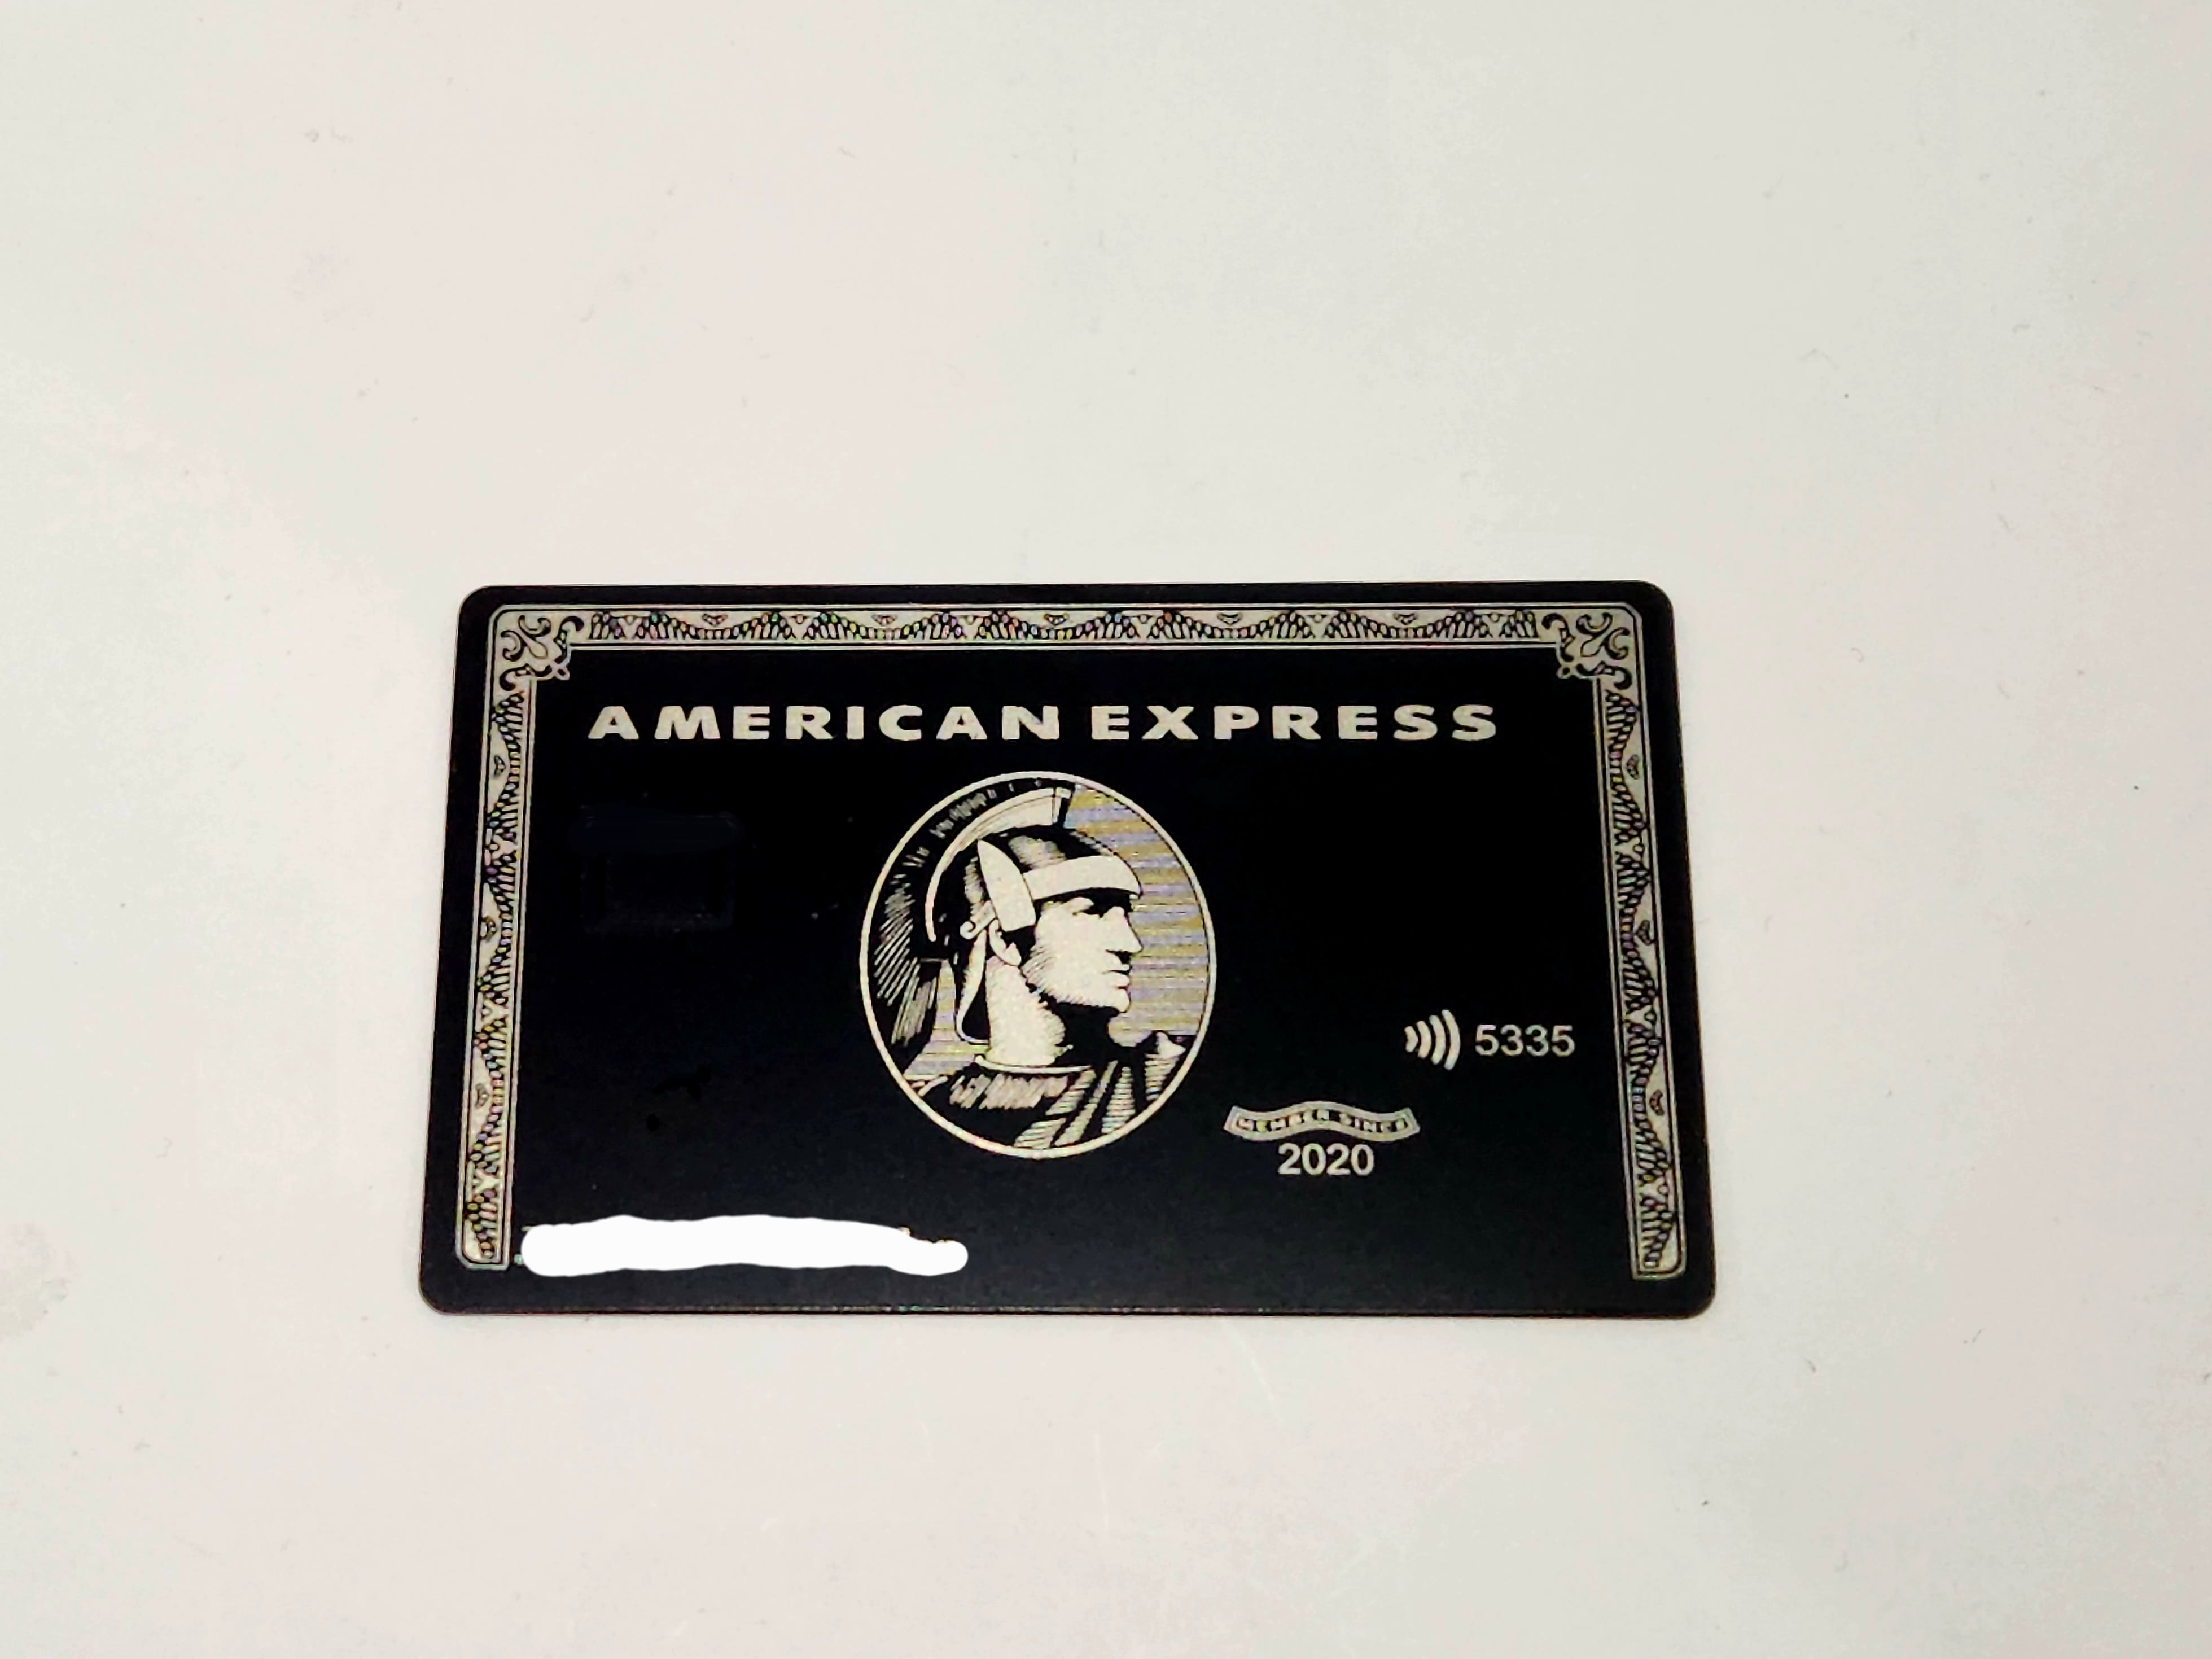 Metal Credit Cards (These are the regular finish cards) - Metal